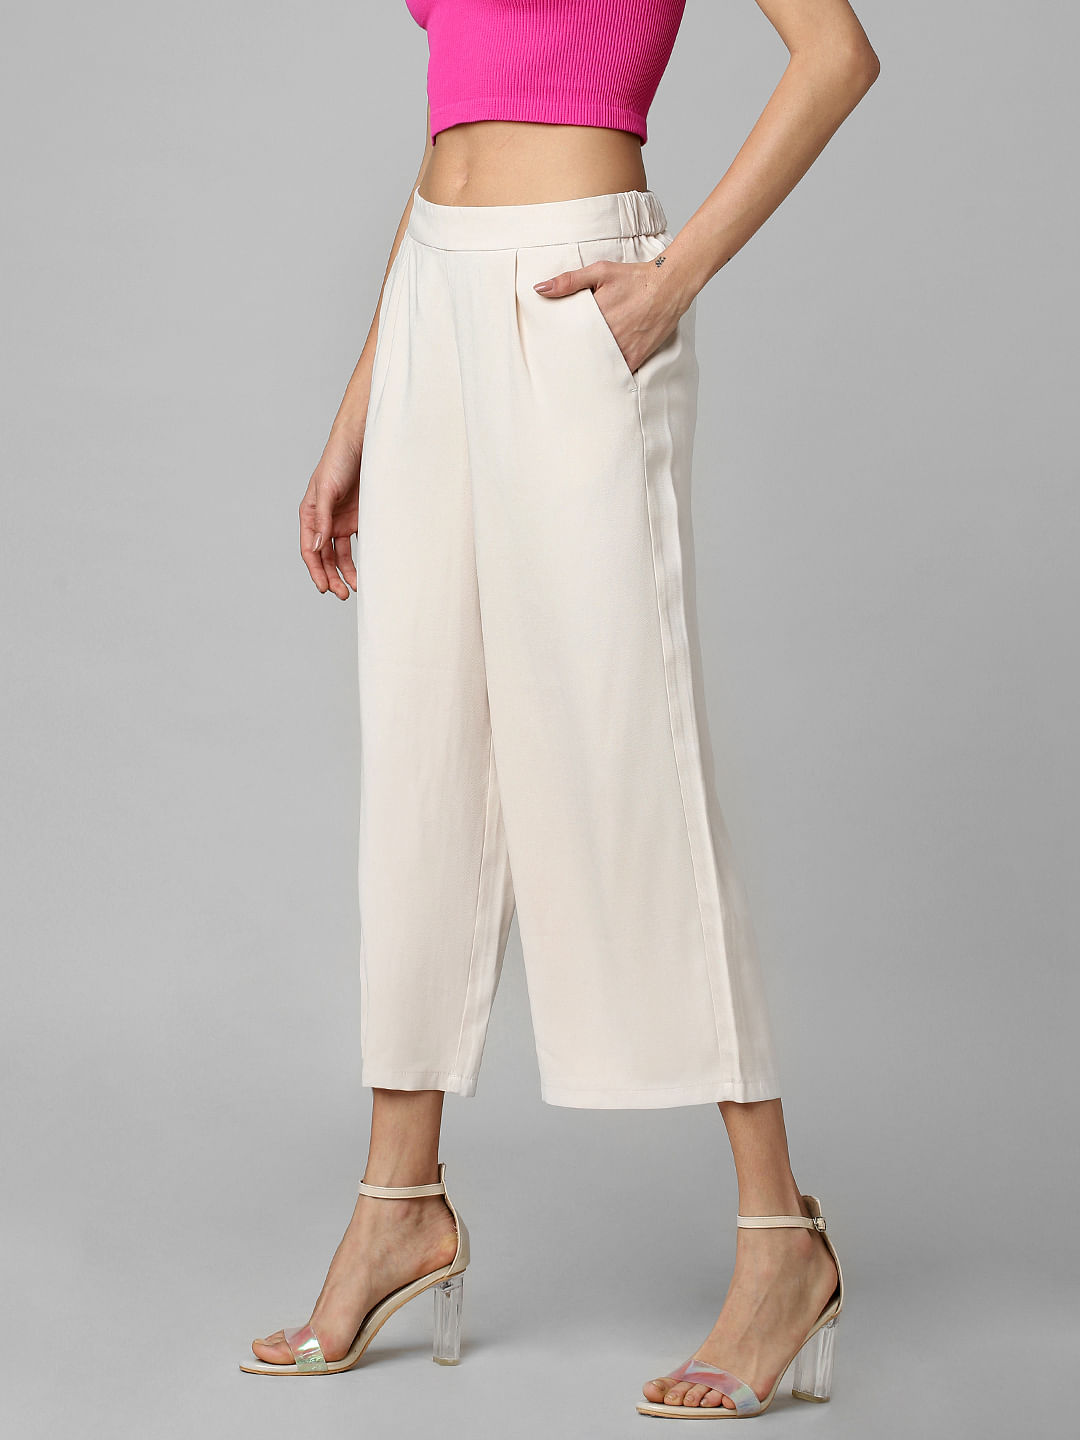 Buy Off White Hand Block Printed Cotton Overlap Crop Top with Brown Culottes  Set of 2  SEP21LG06RUNG1  The loom